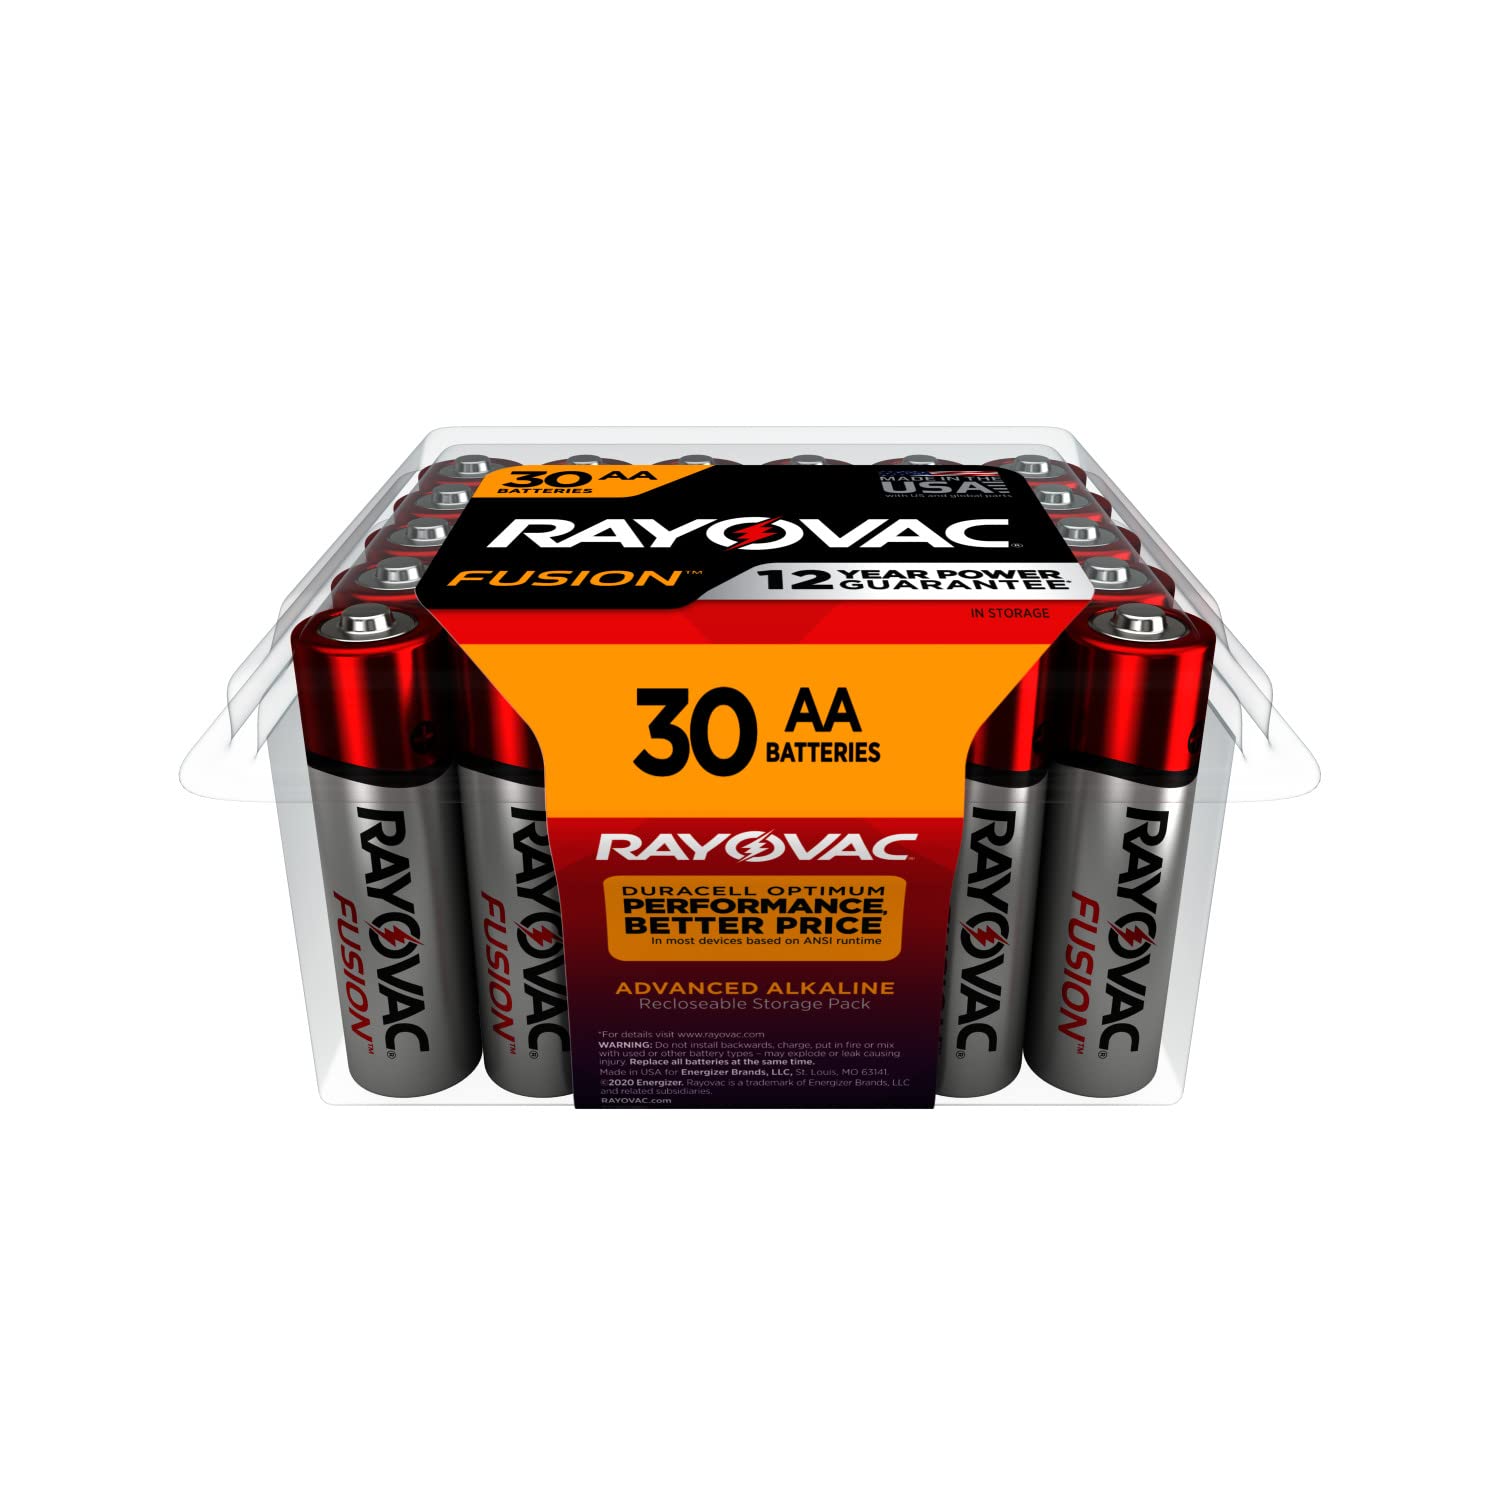 Rayovac Fusion AA Batteries, Premium Alkaline Double A Batteries (30 Battery Count)